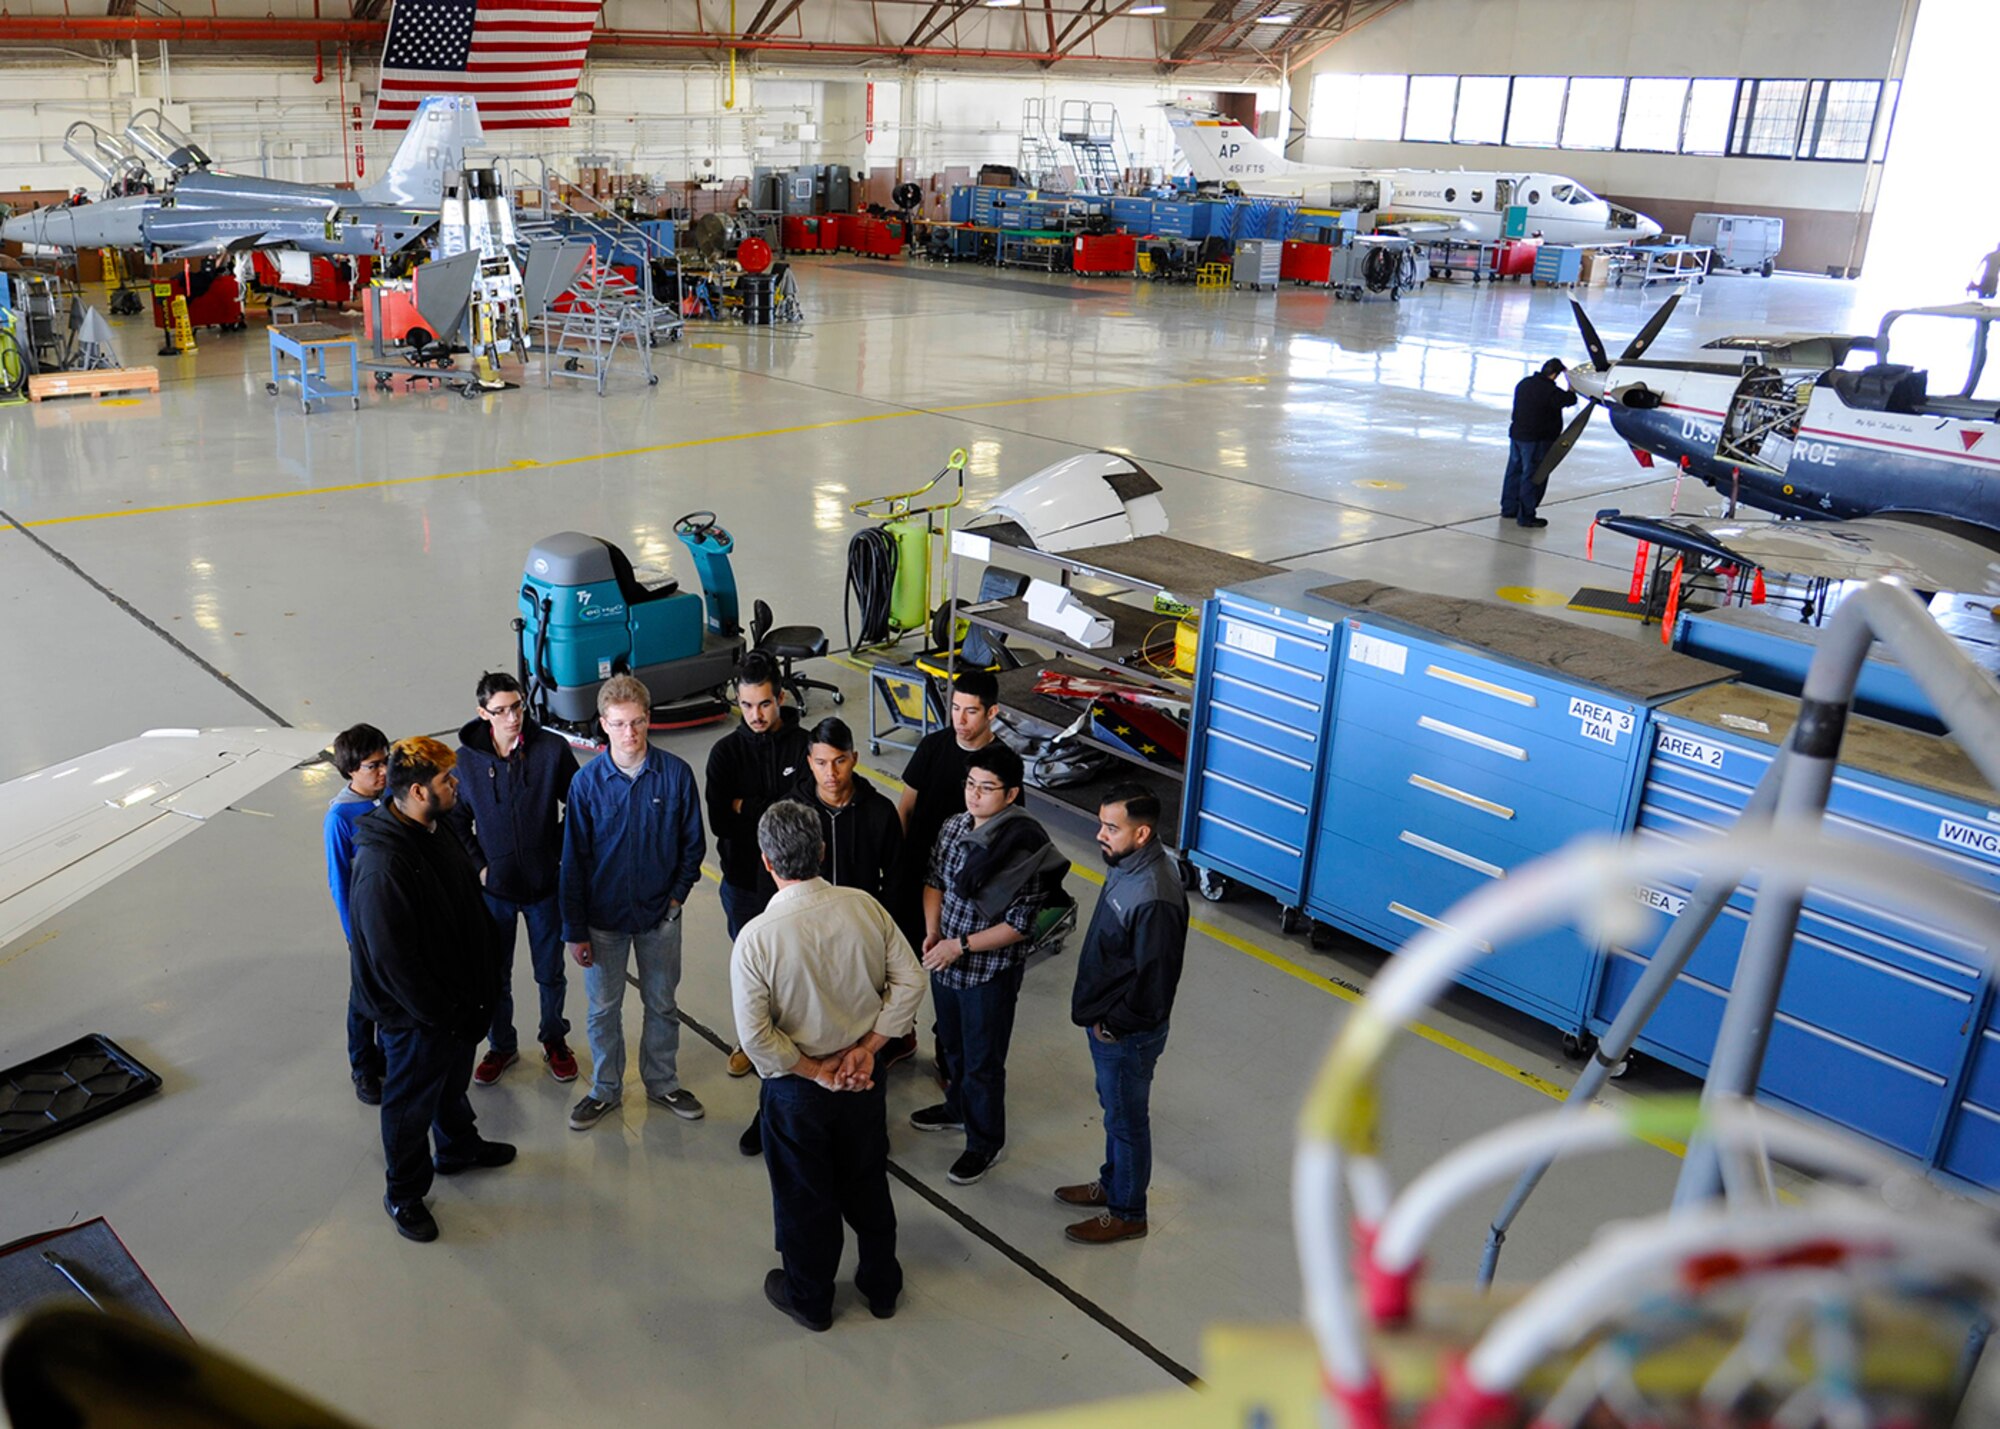 Larry Welfel, 12th Maintenance Squadron, T-1A aircraft technician, briefs Wagner high school students inside the phase inspection facility during the job shadow tour, Feb. 2, 2018, Joint Base San Antonio-Randolph, Texas.